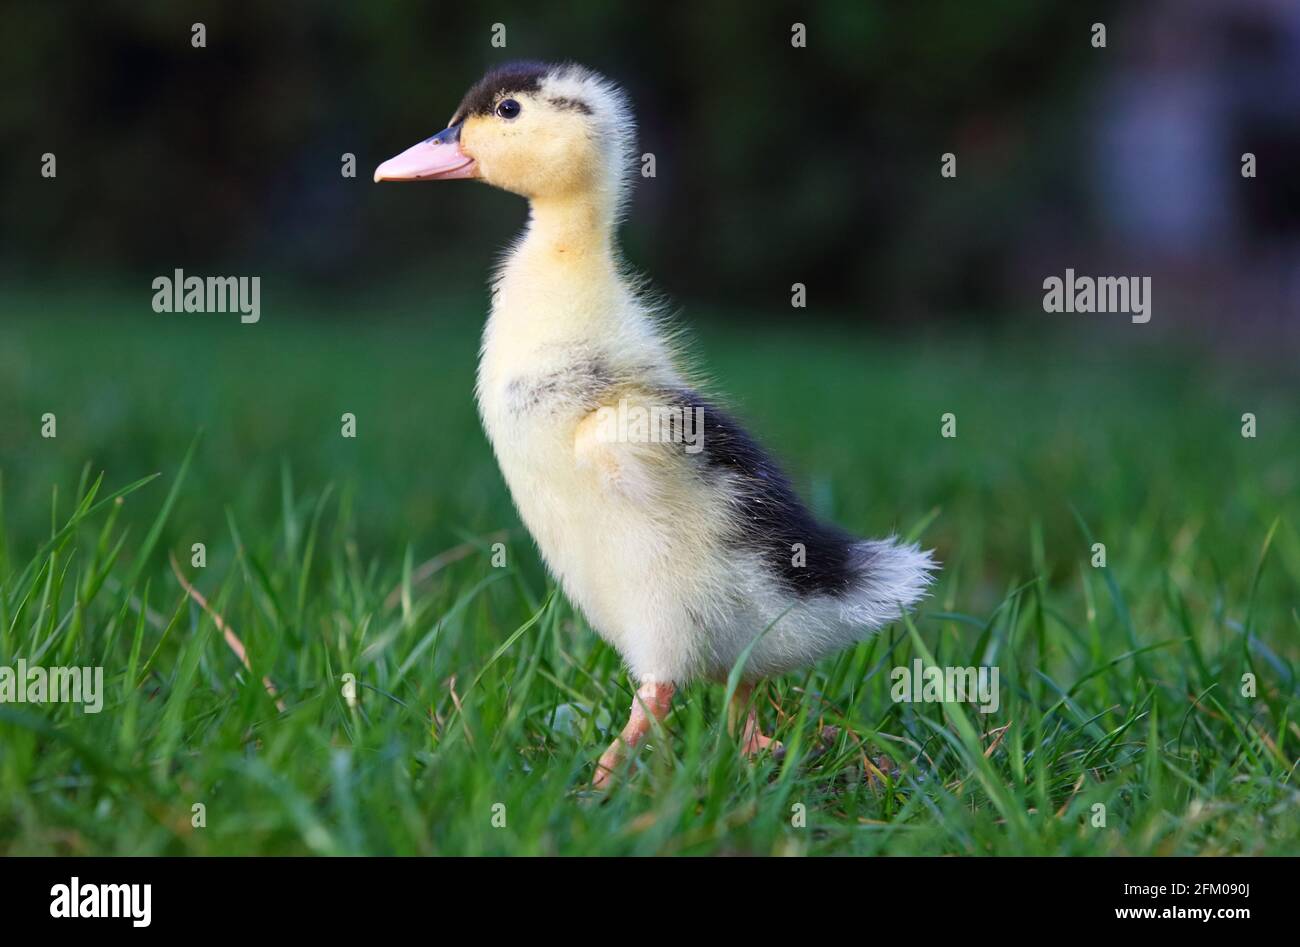 Baby duck in greem grass, nature Stock Photo